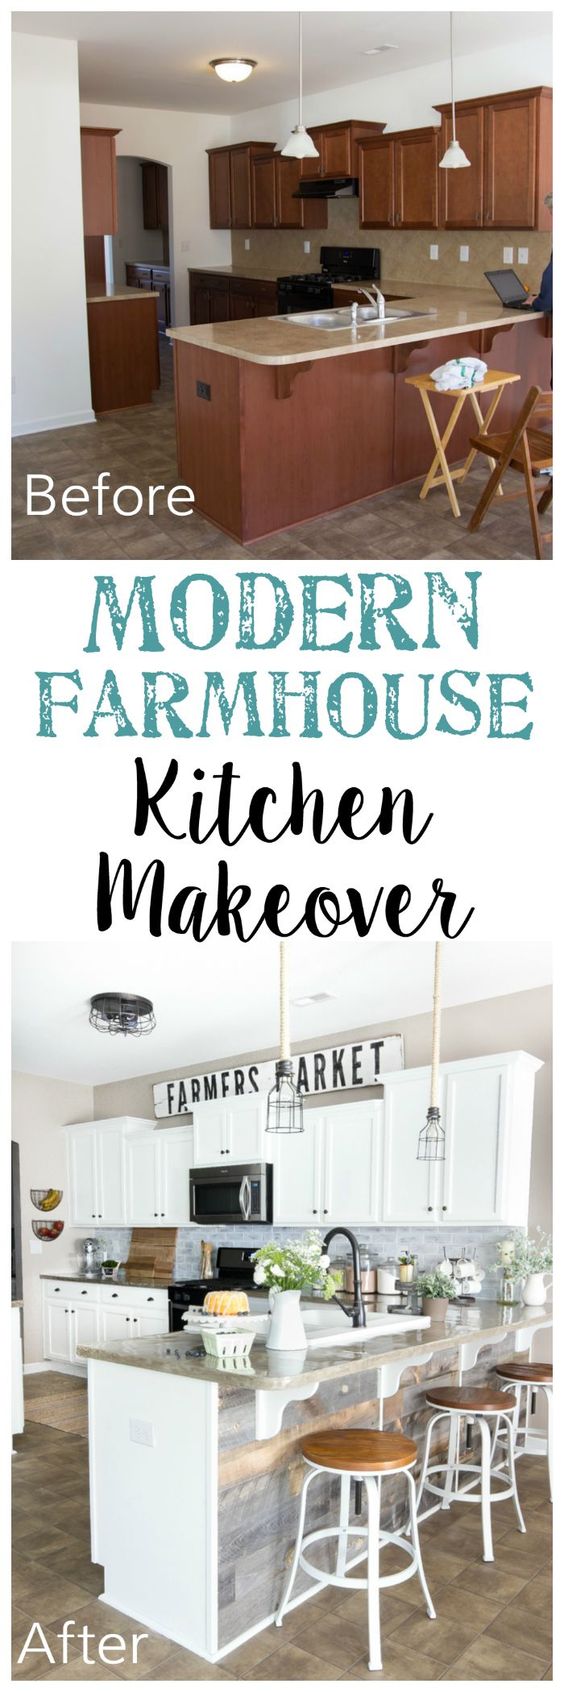 This Dark And Boring Kitchen Gets a Budget-Friendly Makeover With Modern Farmhouse Style. 